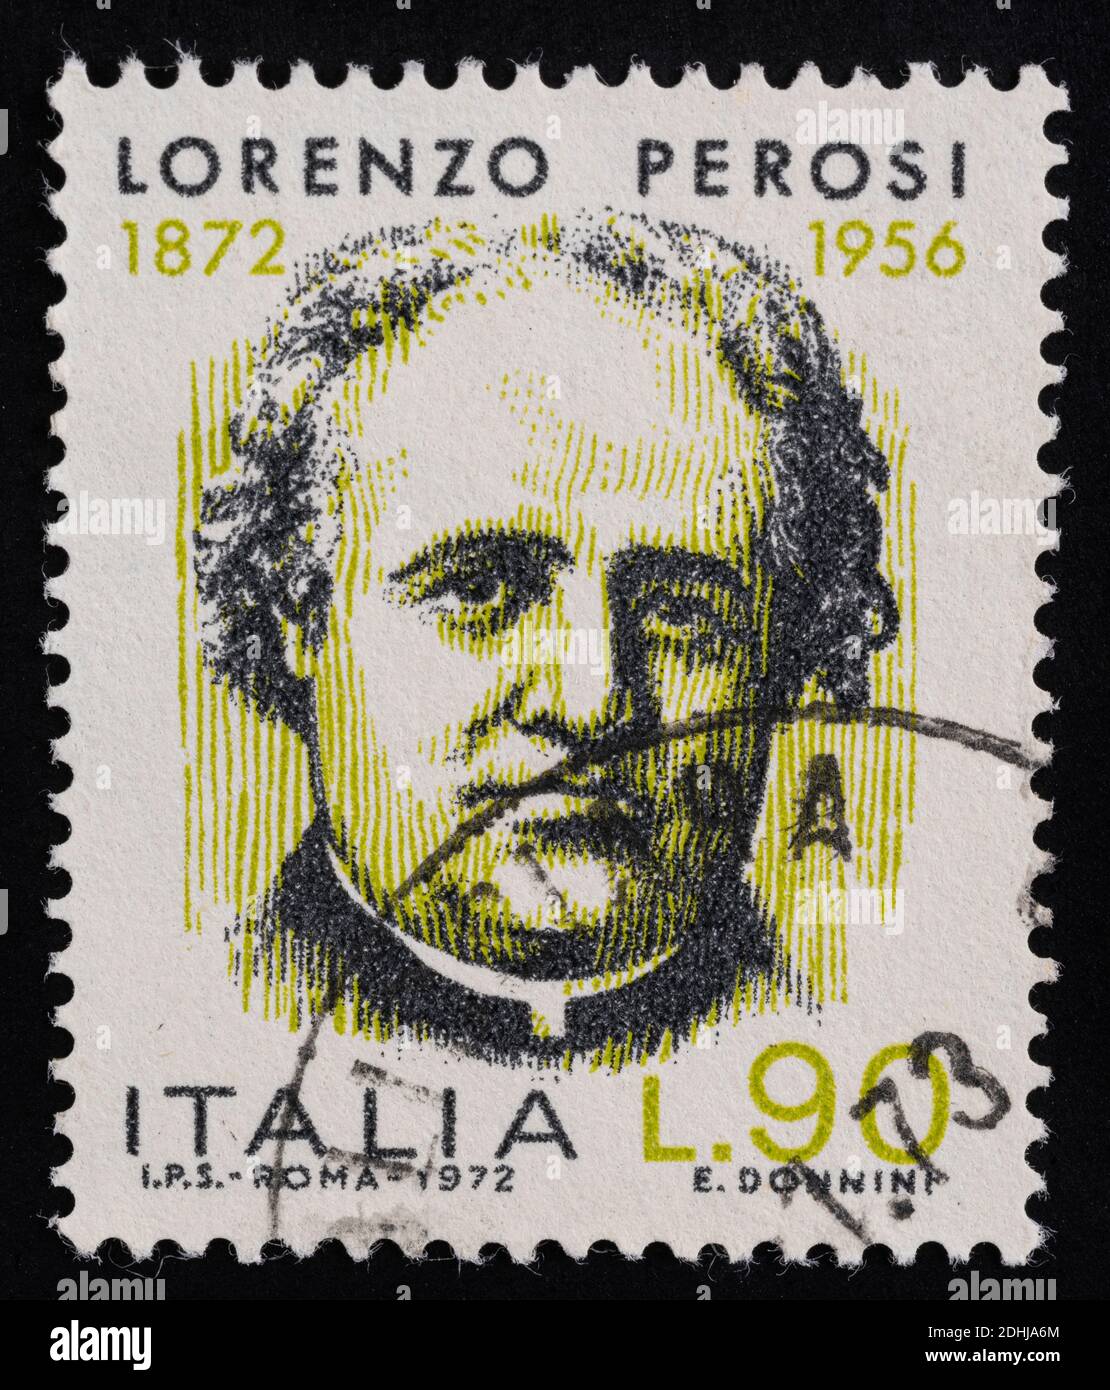 Udine, Italy. December 10, 2020. the commemoration of Lorenzo Perosi on an Italian postage stamp Stock Photo